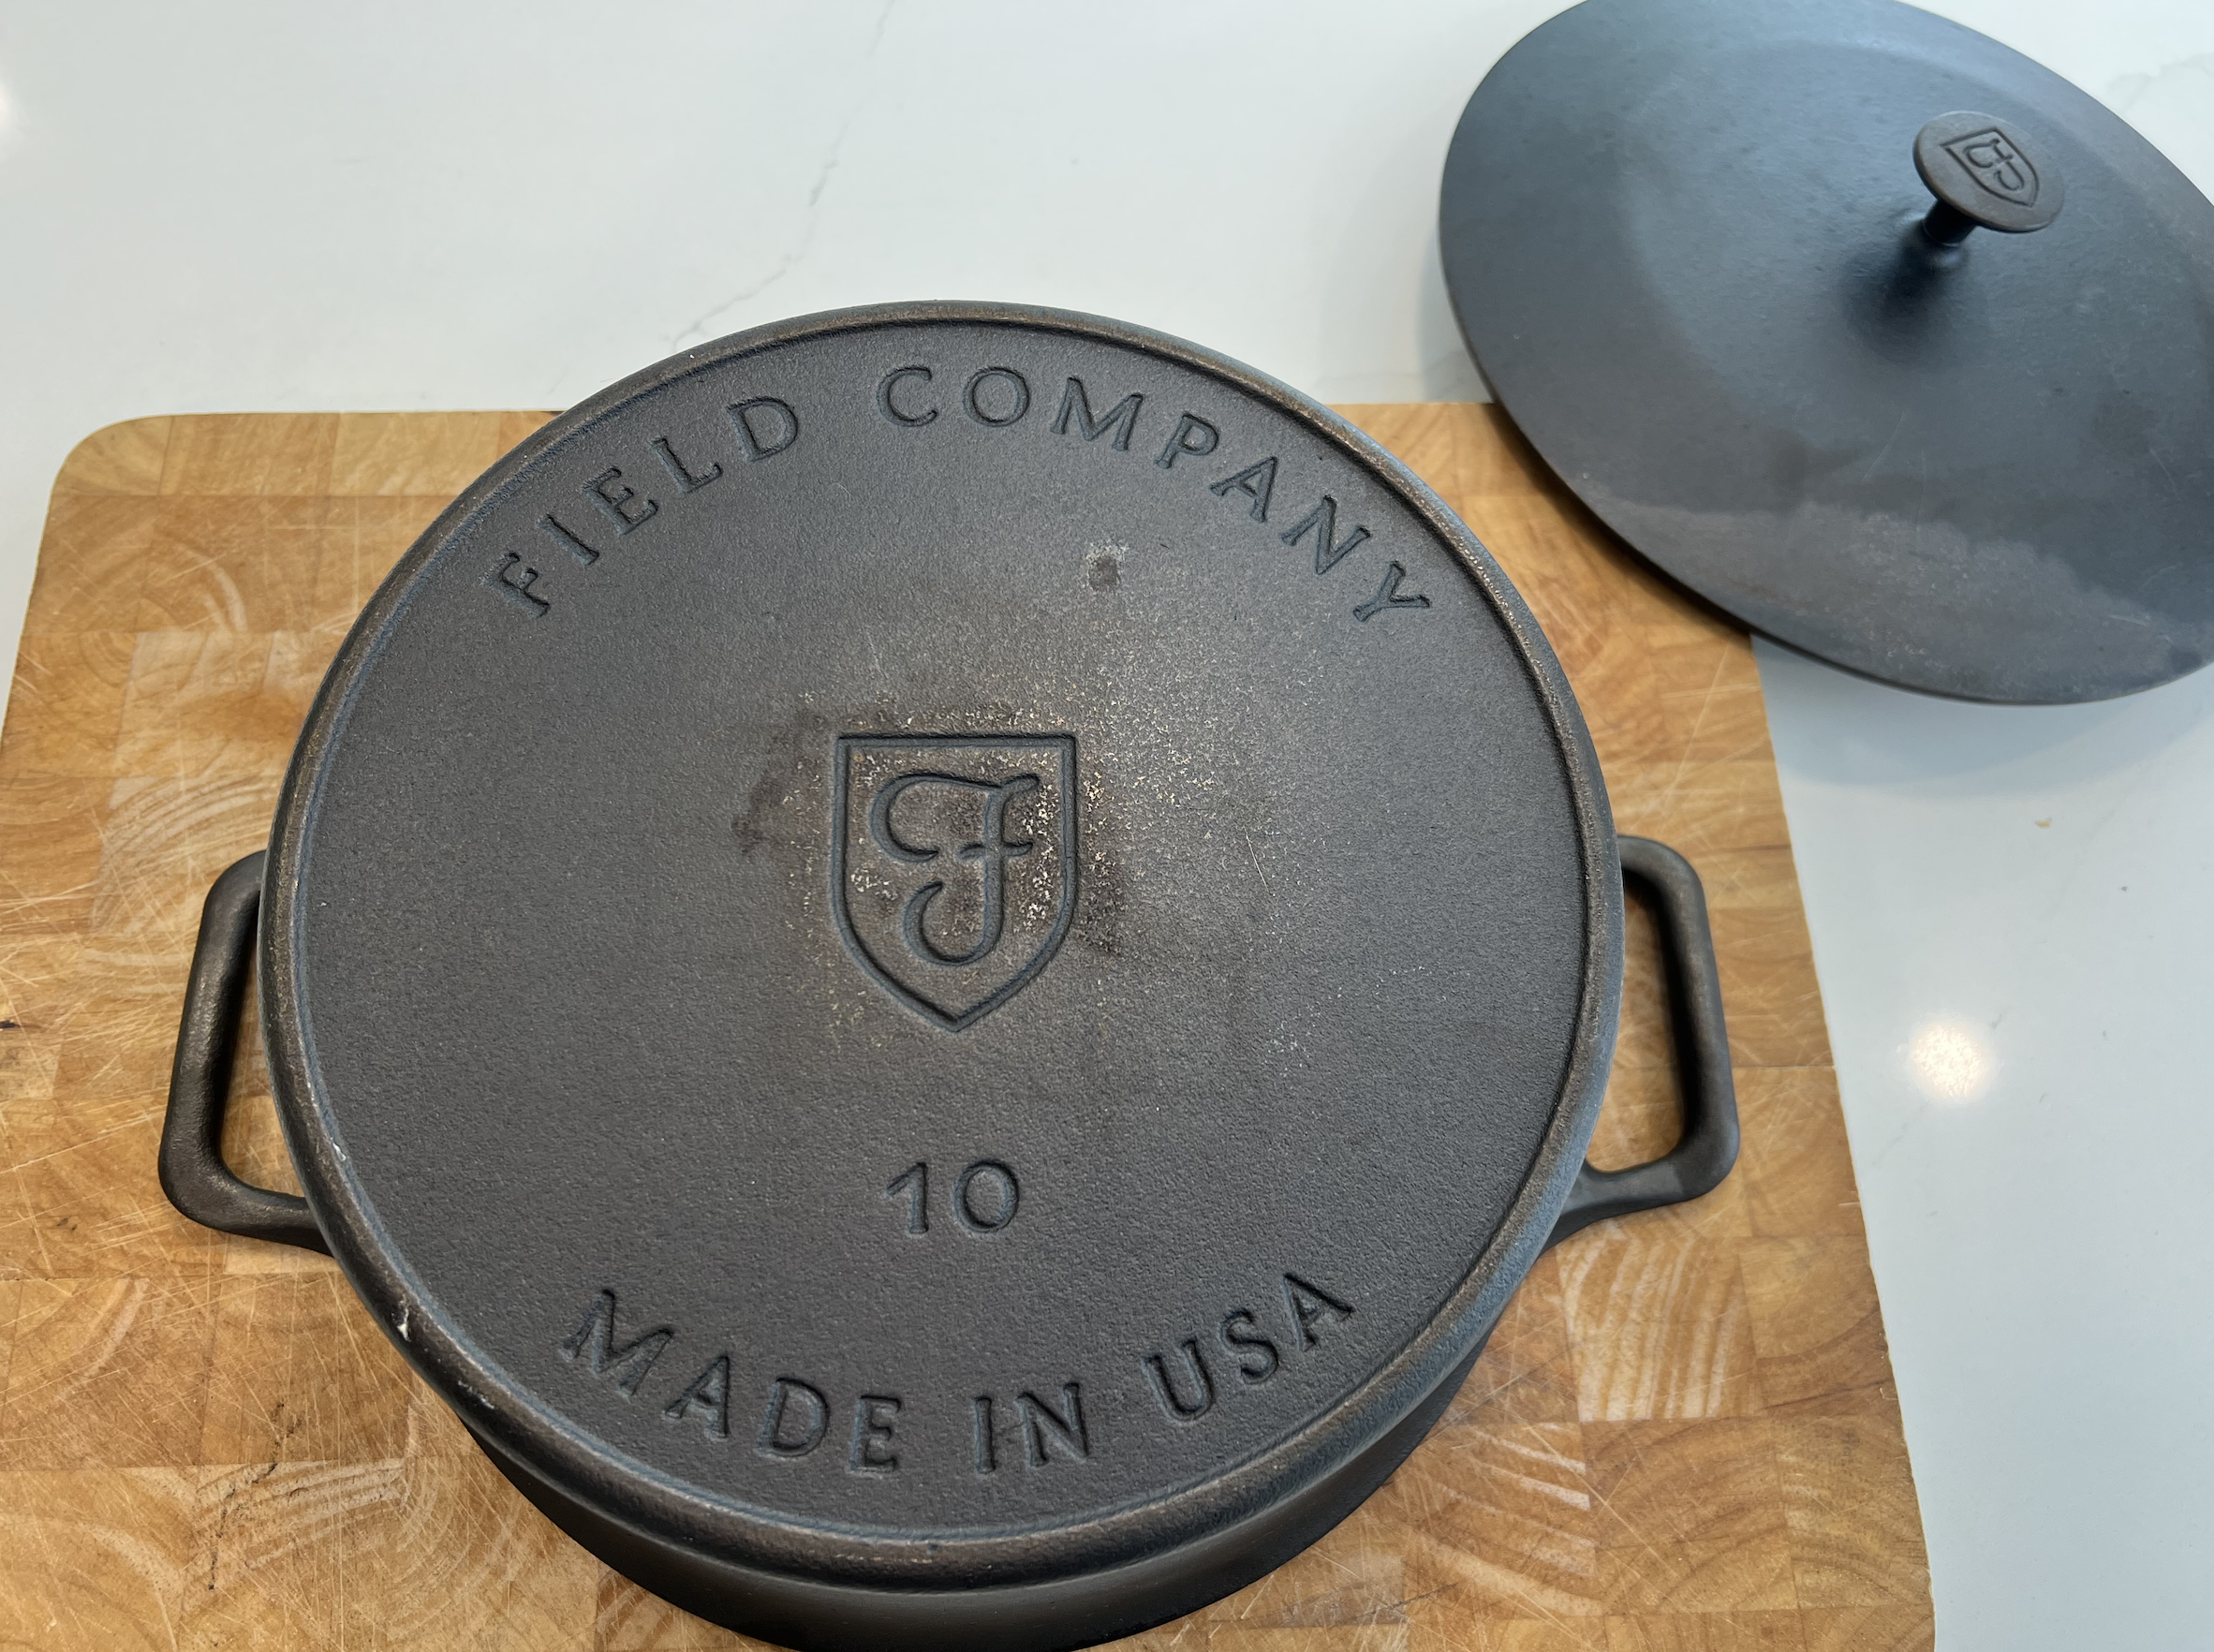 sourdough product review field company dutch oven handmade of cast iron in the united states of america 7